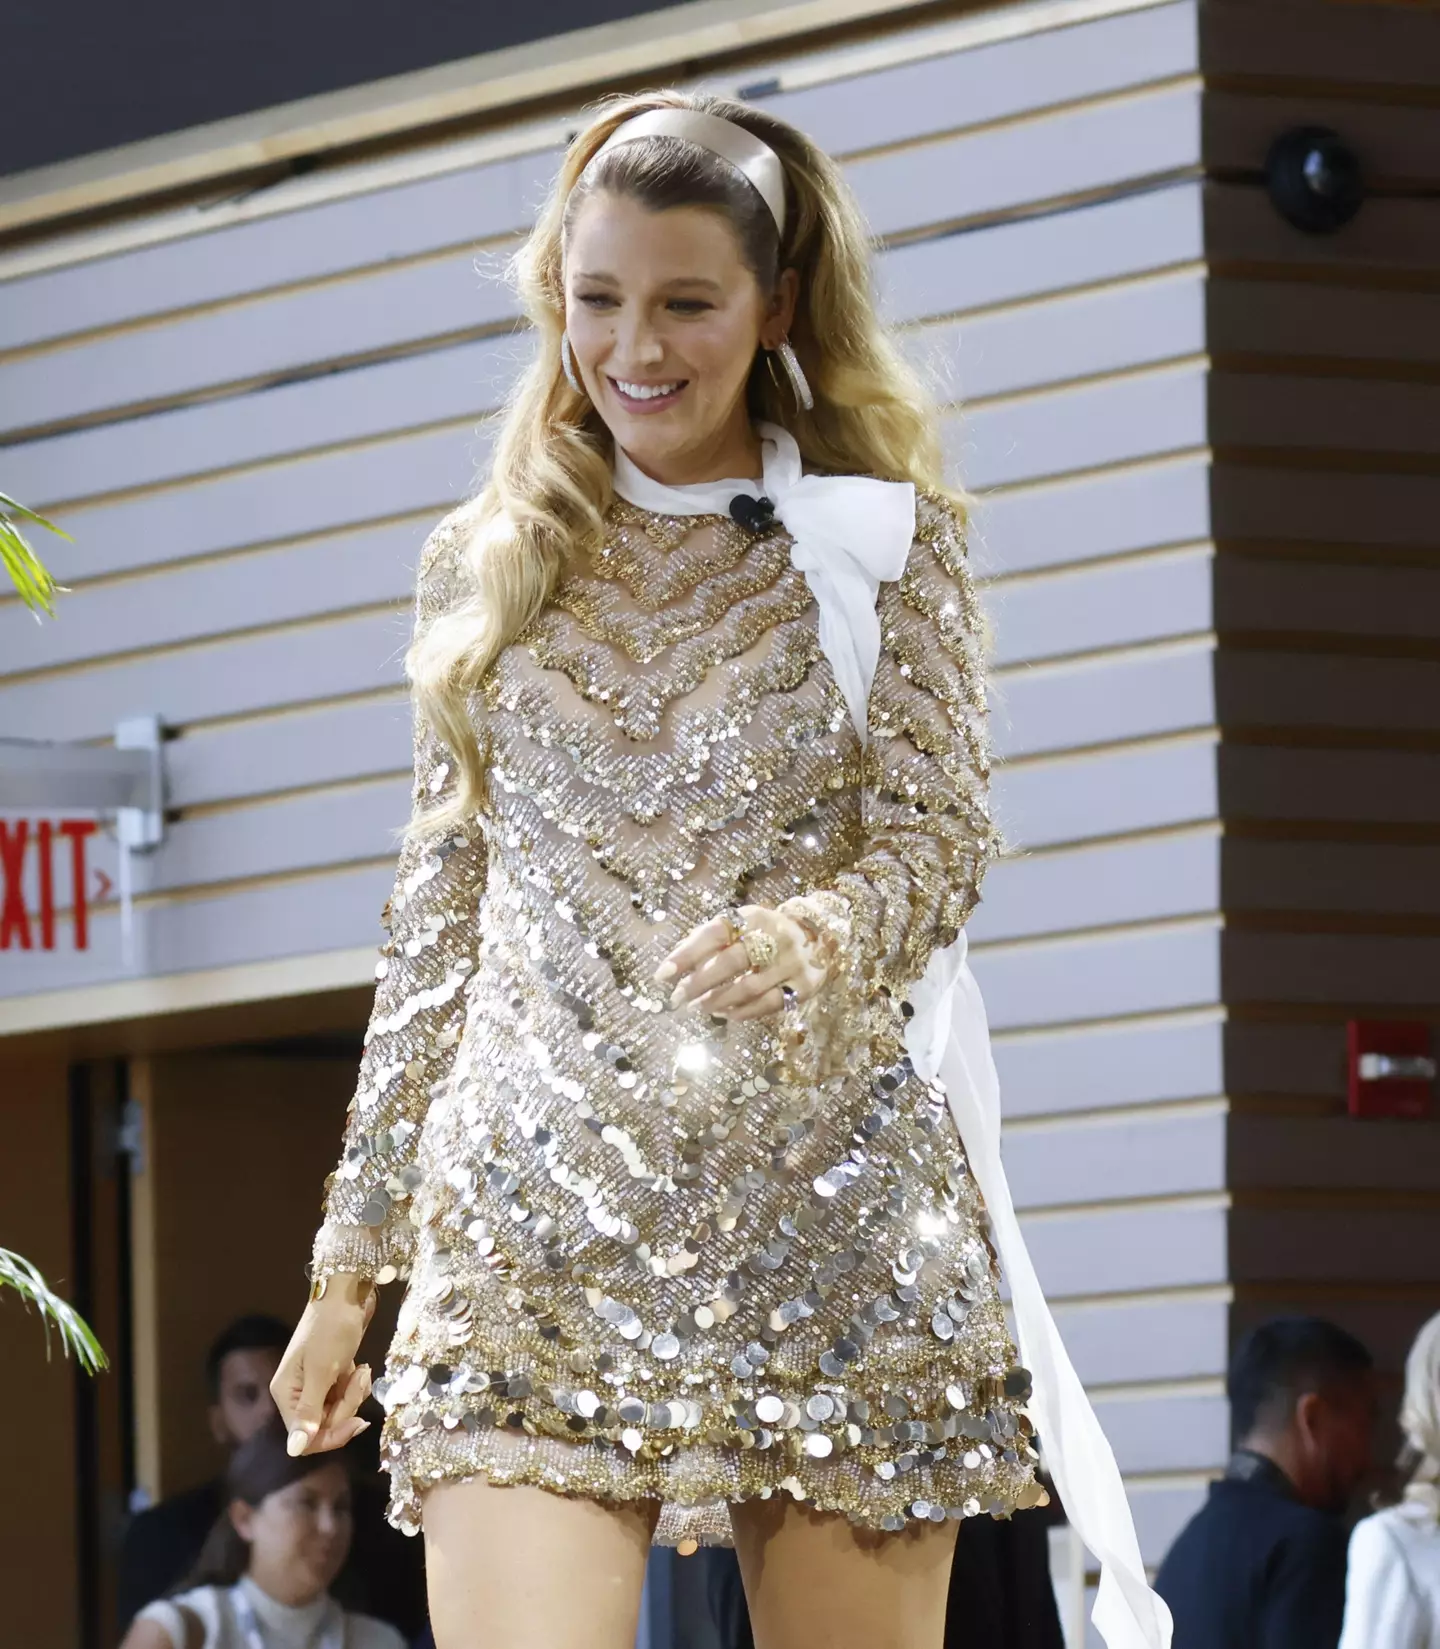 Blake Lively showed off her baby bump at the Forbes Power Women's Summit.